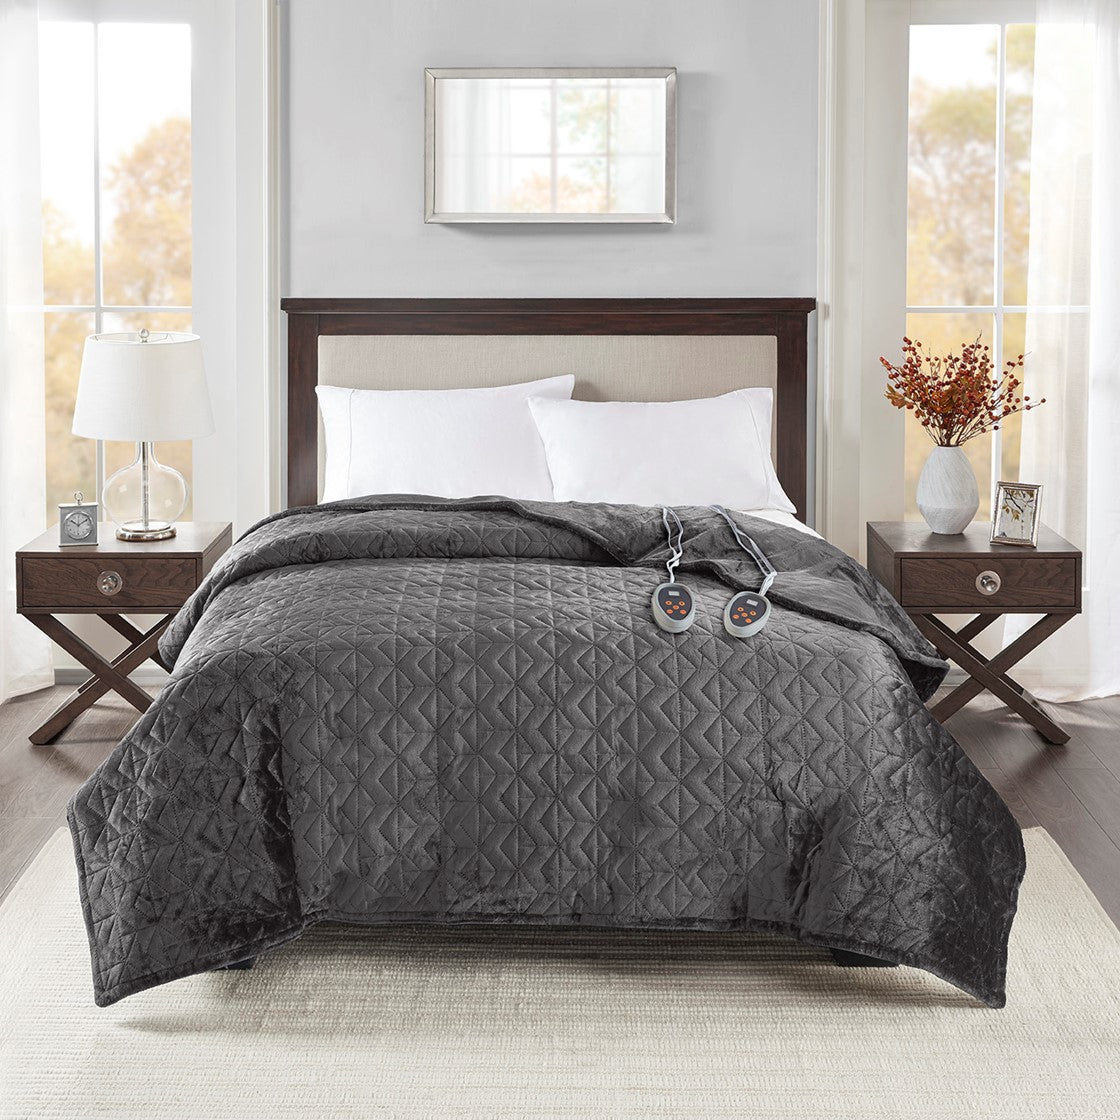 Beautyrest Quilted Plush Heated Blanket - Grey - Full Size